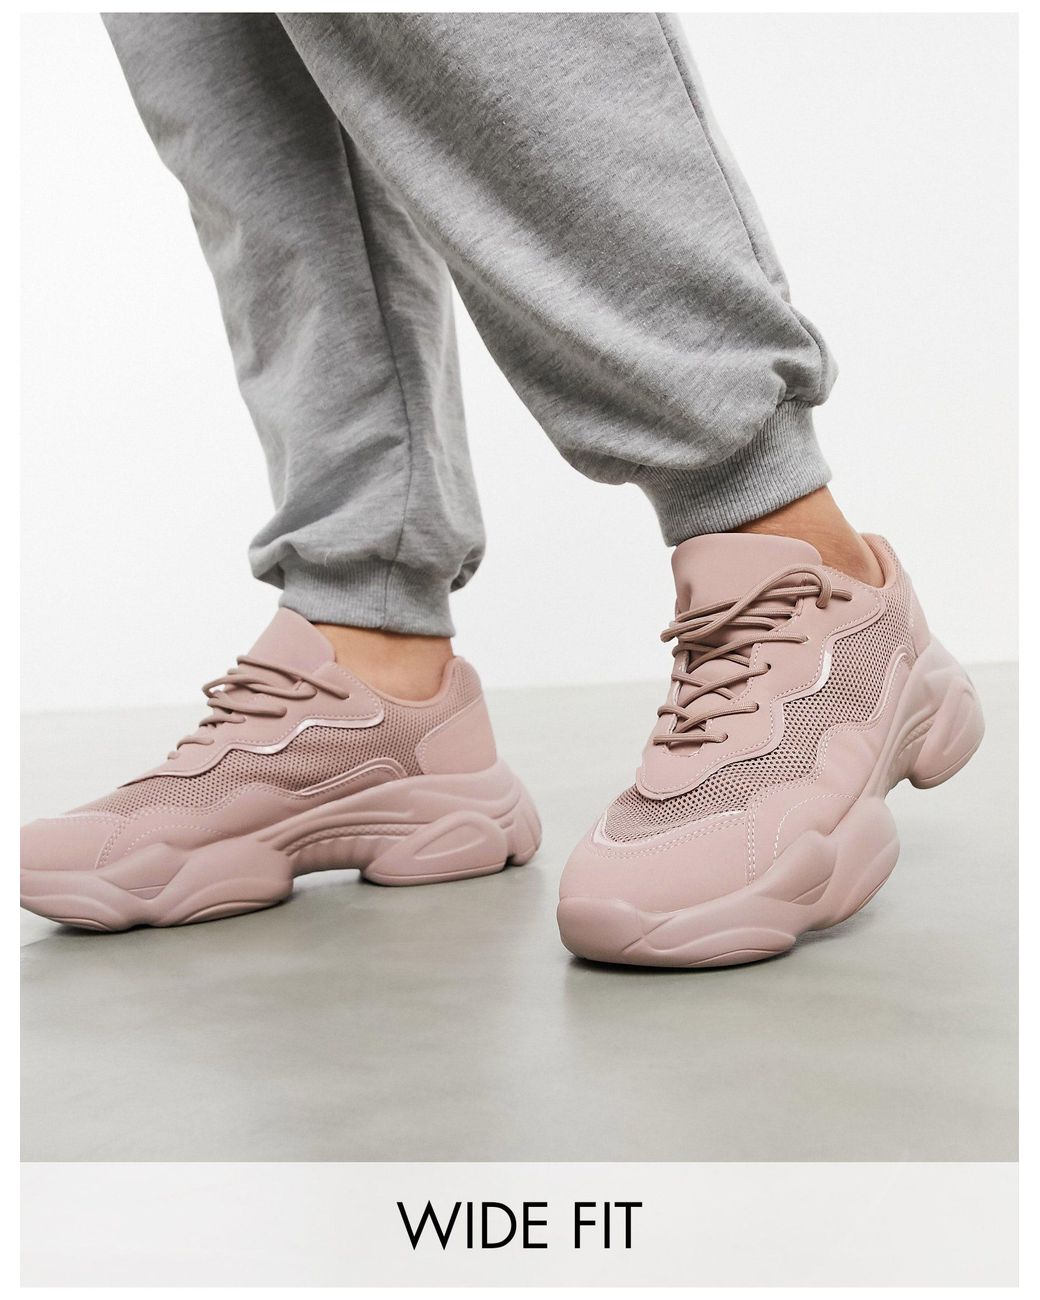 Divine Asos Donna Scarpe Sneakers Sneakers chunky Wide Fit Chunky sneakers nere a pianta larga 